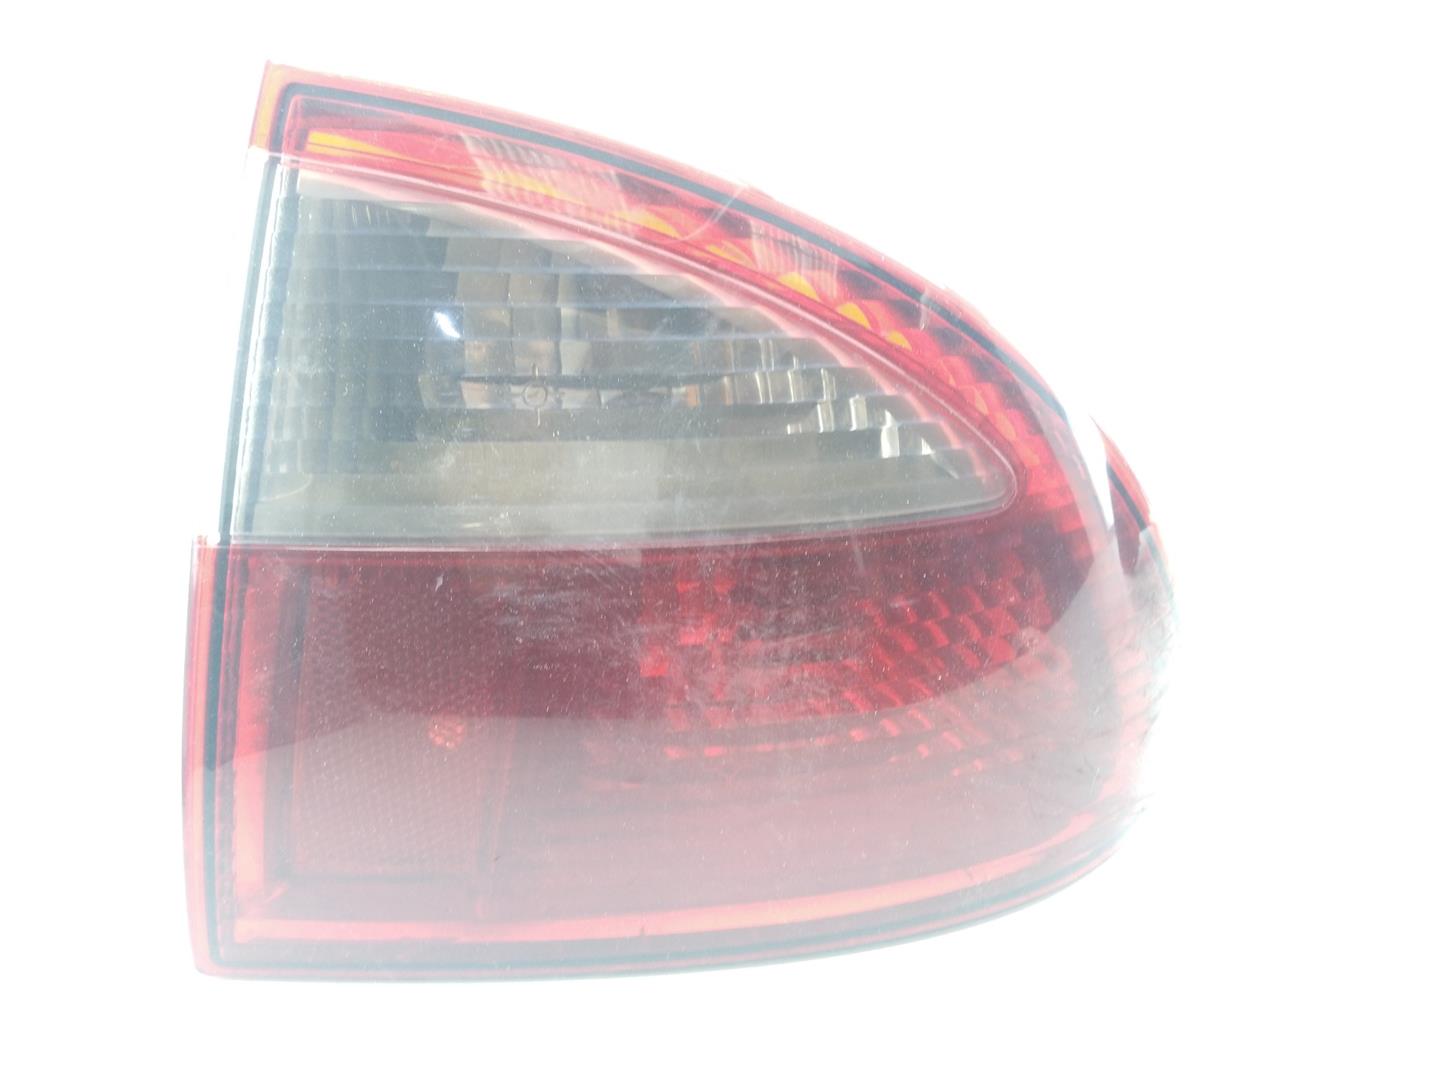 SEAT Leon 1 generation (1999-2005) Rear Right Taillight Lamp 1M6945096A, 1M6945096A, 1M6945096A 24667467